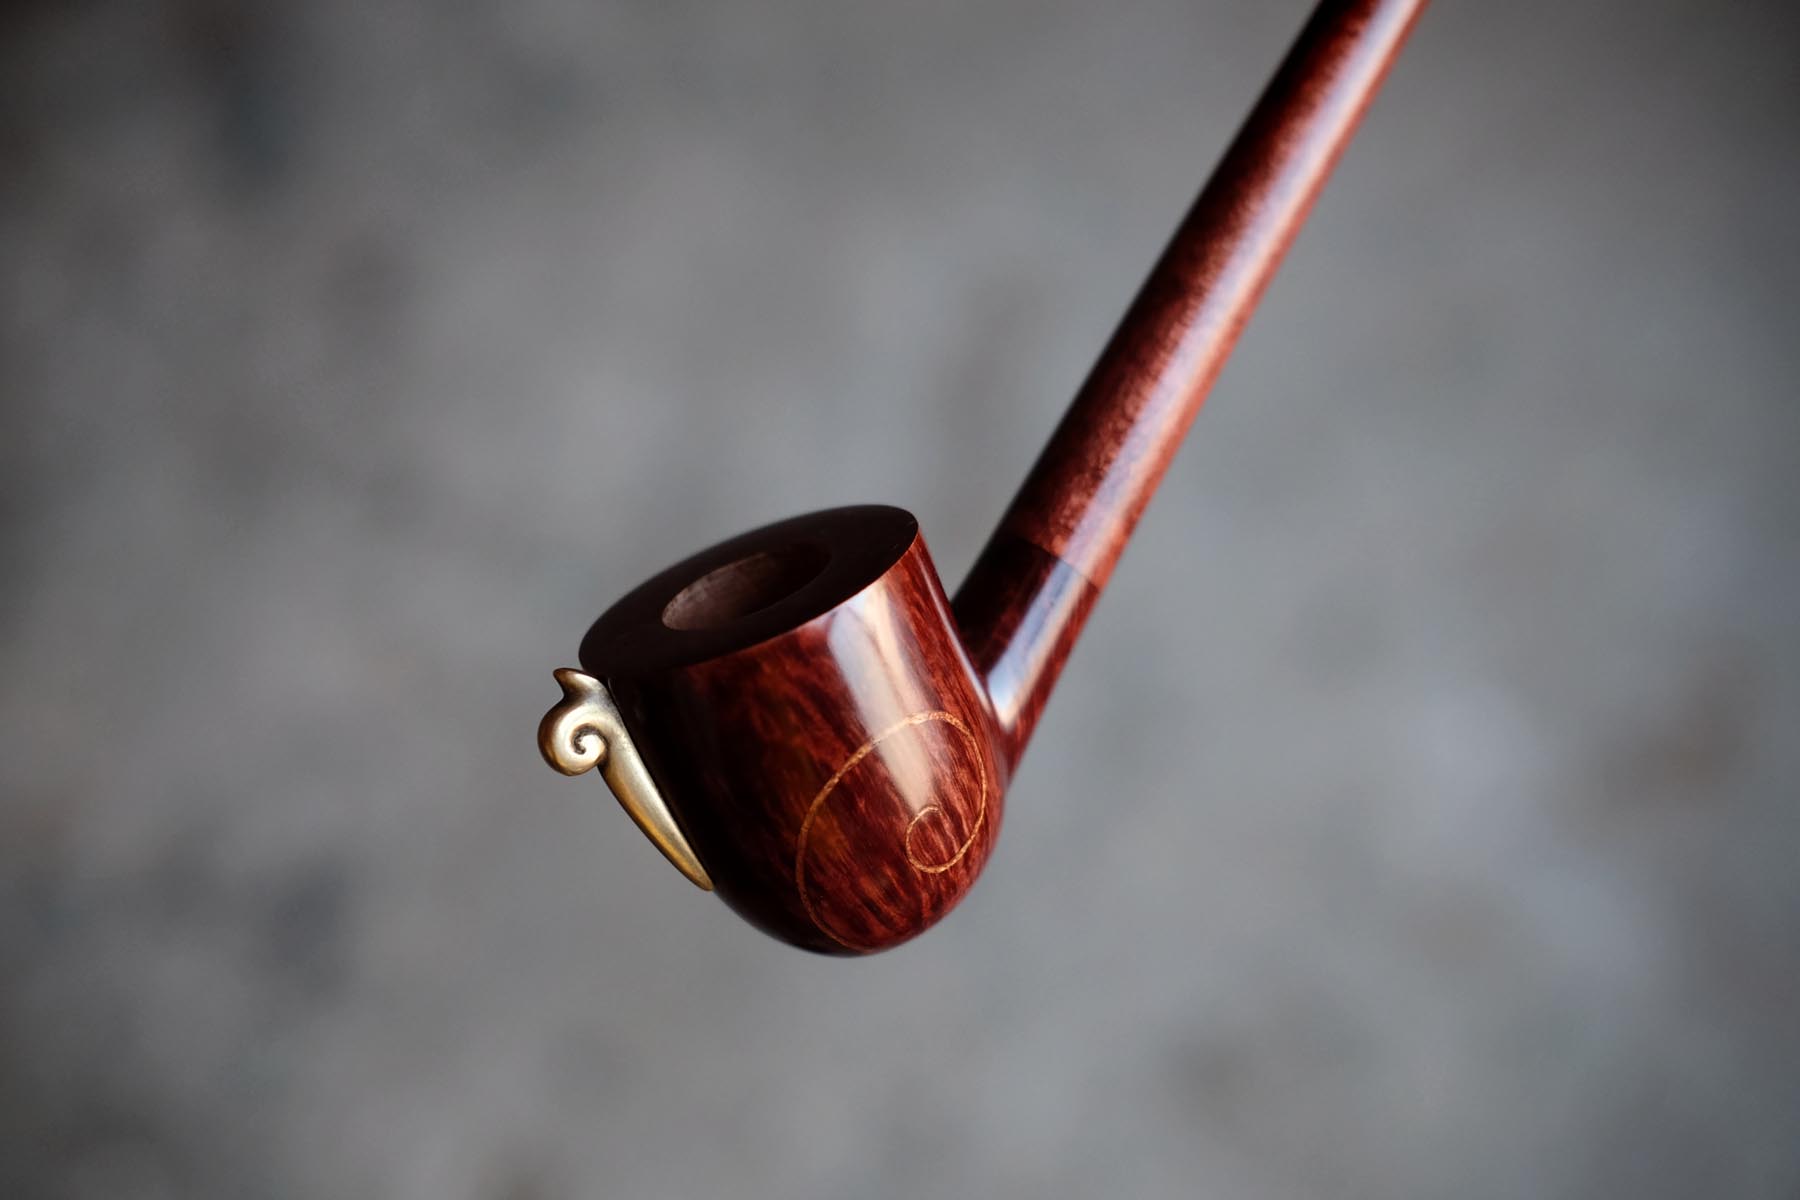 Old Bilbo's pipe, churchwarden pipe made of briar, maple and brass, handcrafted by Arcangelo Ambrosi